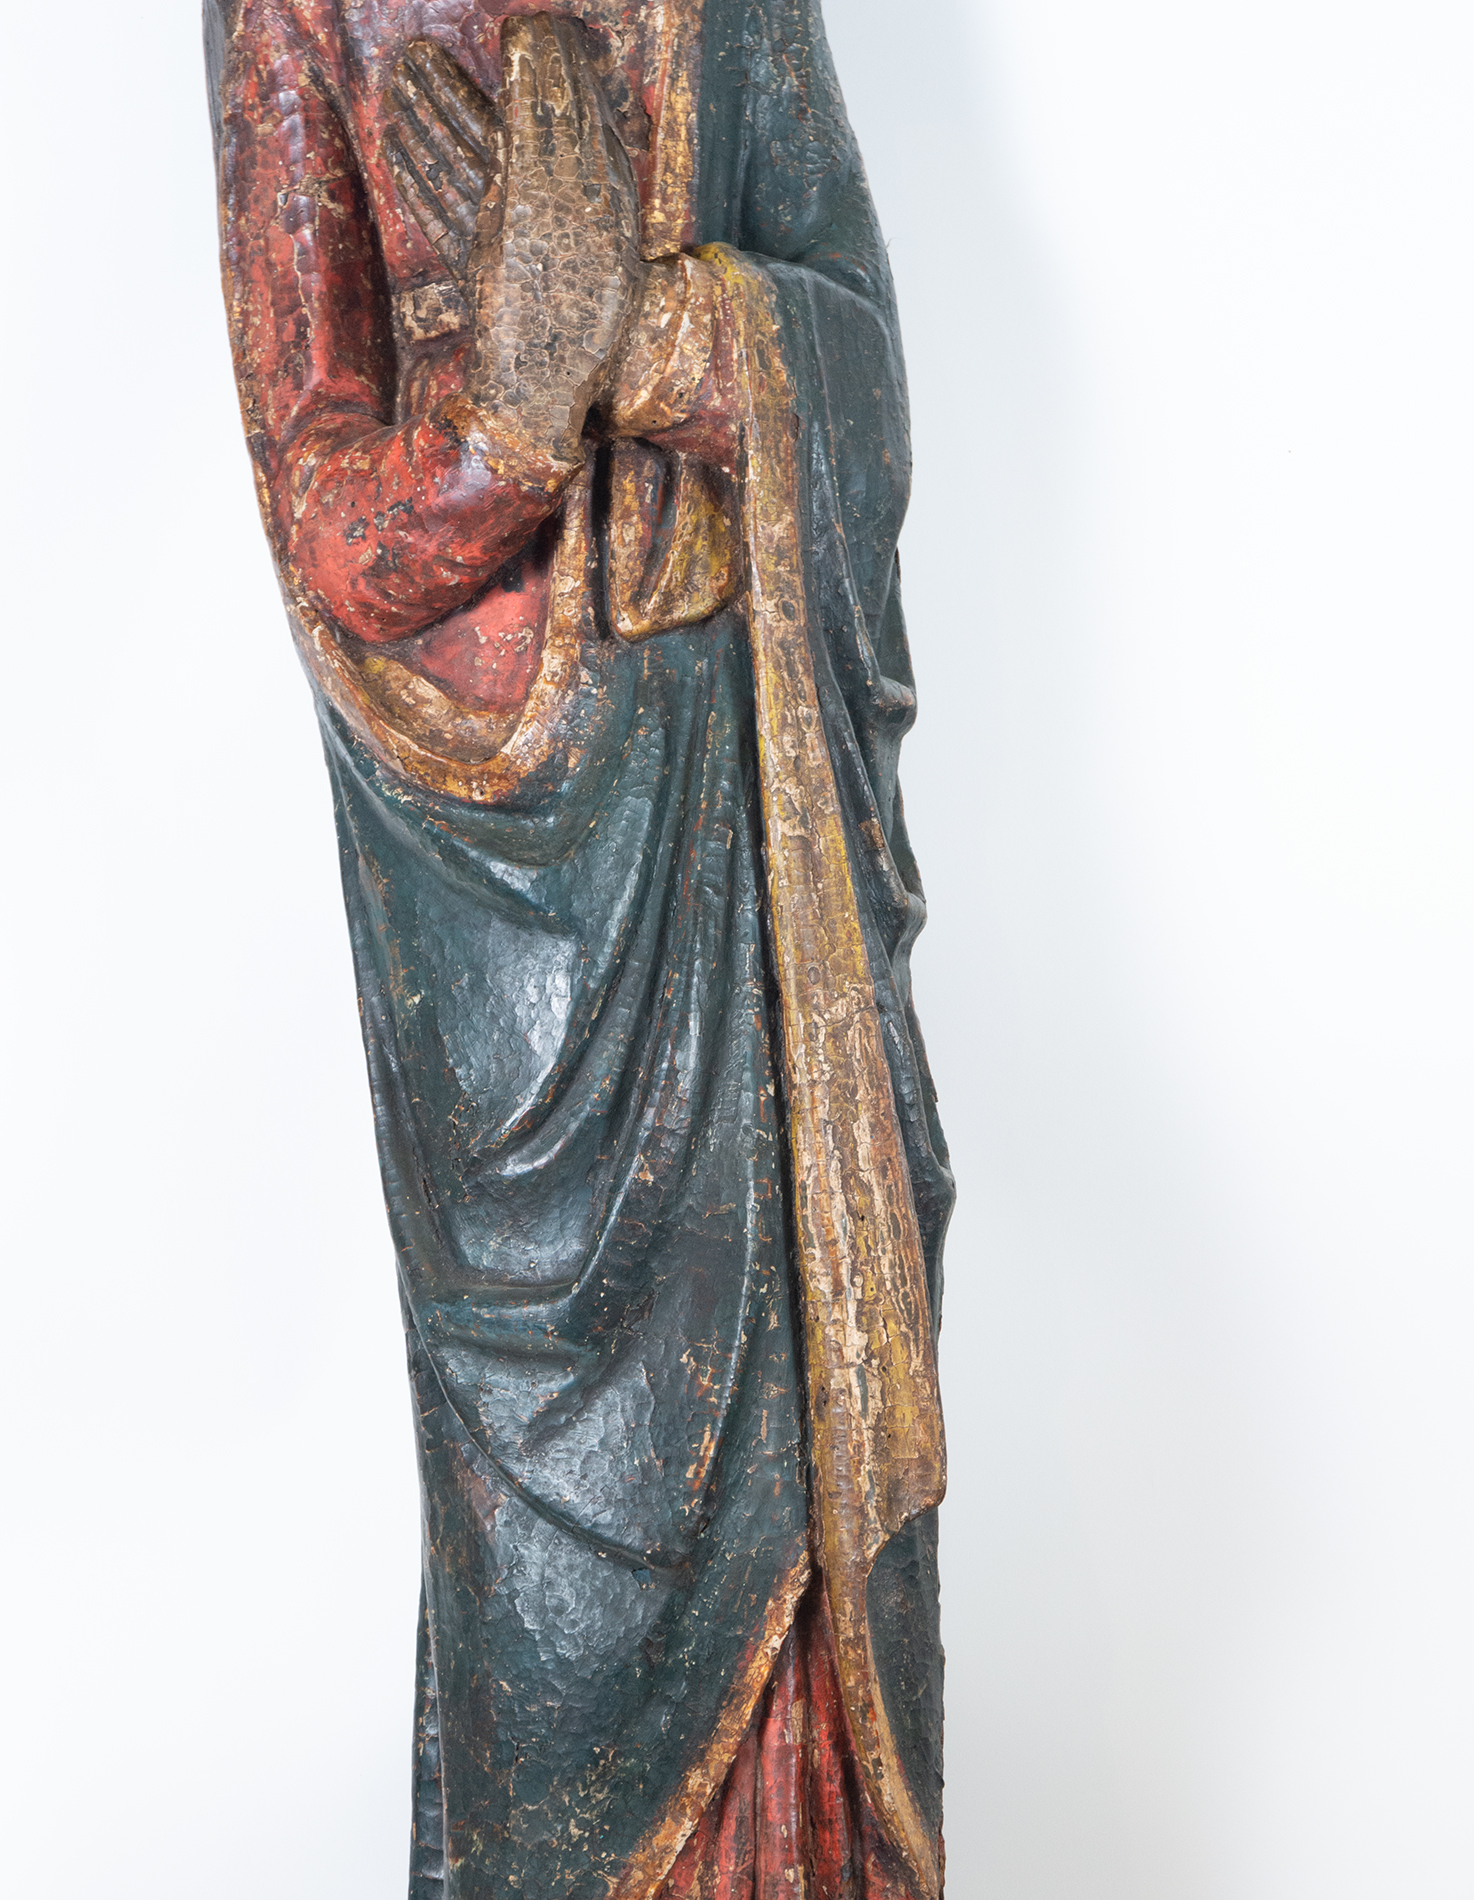 Pair of Large Romanesque Carvings representing Mary and Saint John the Evangelist, Romanesque School - Image 13 of 22